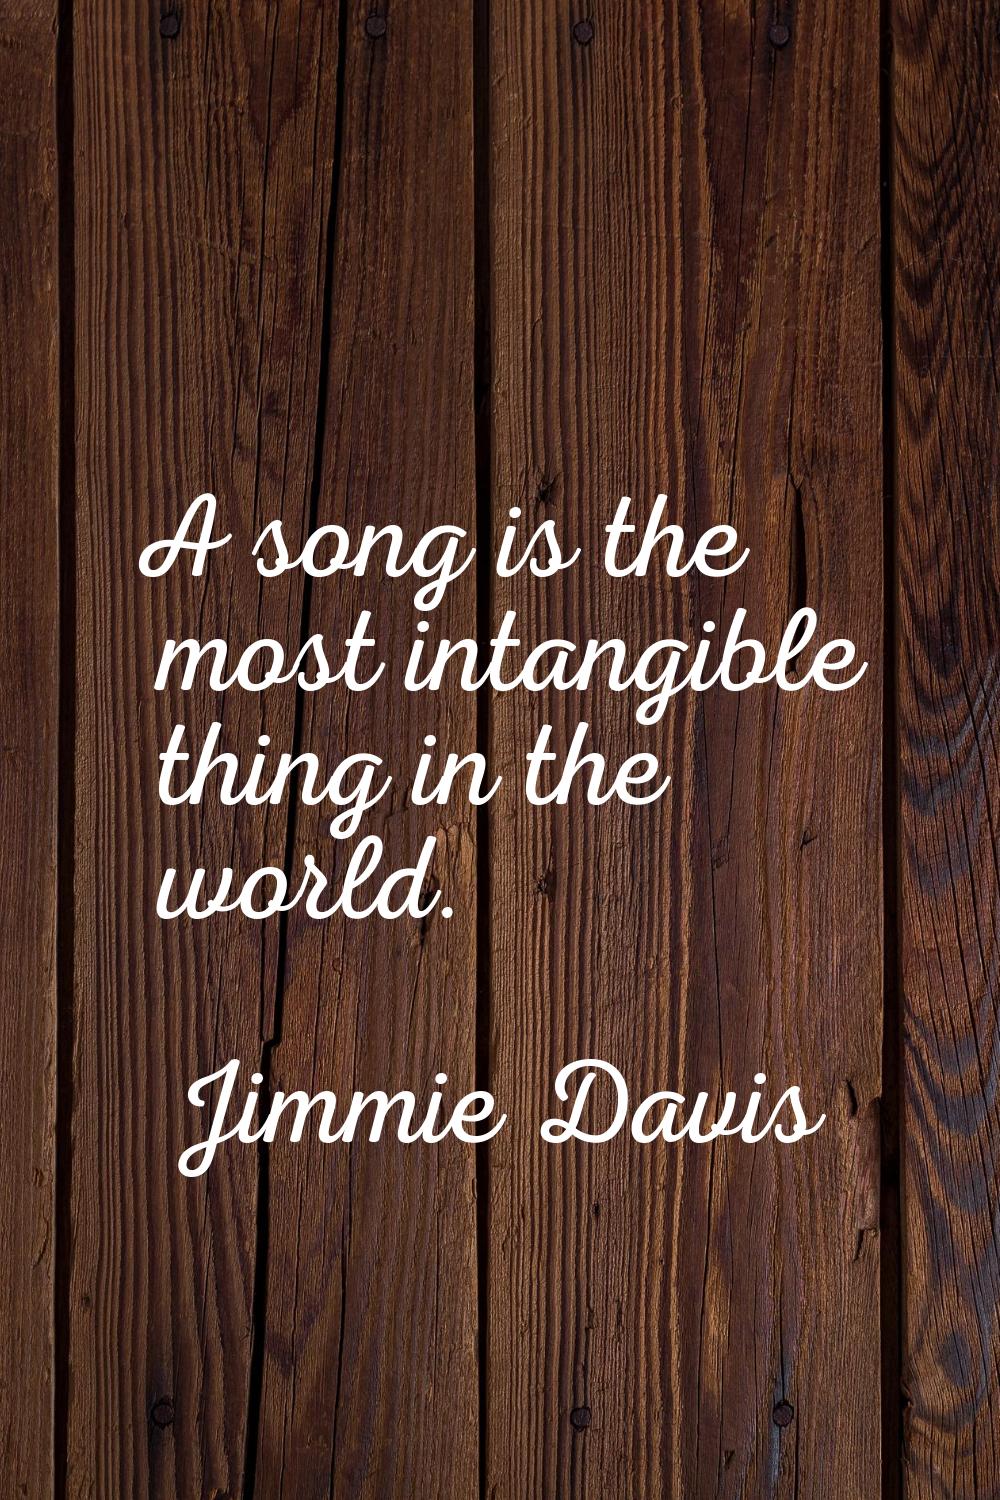 A song is the most intangible thing in the world.